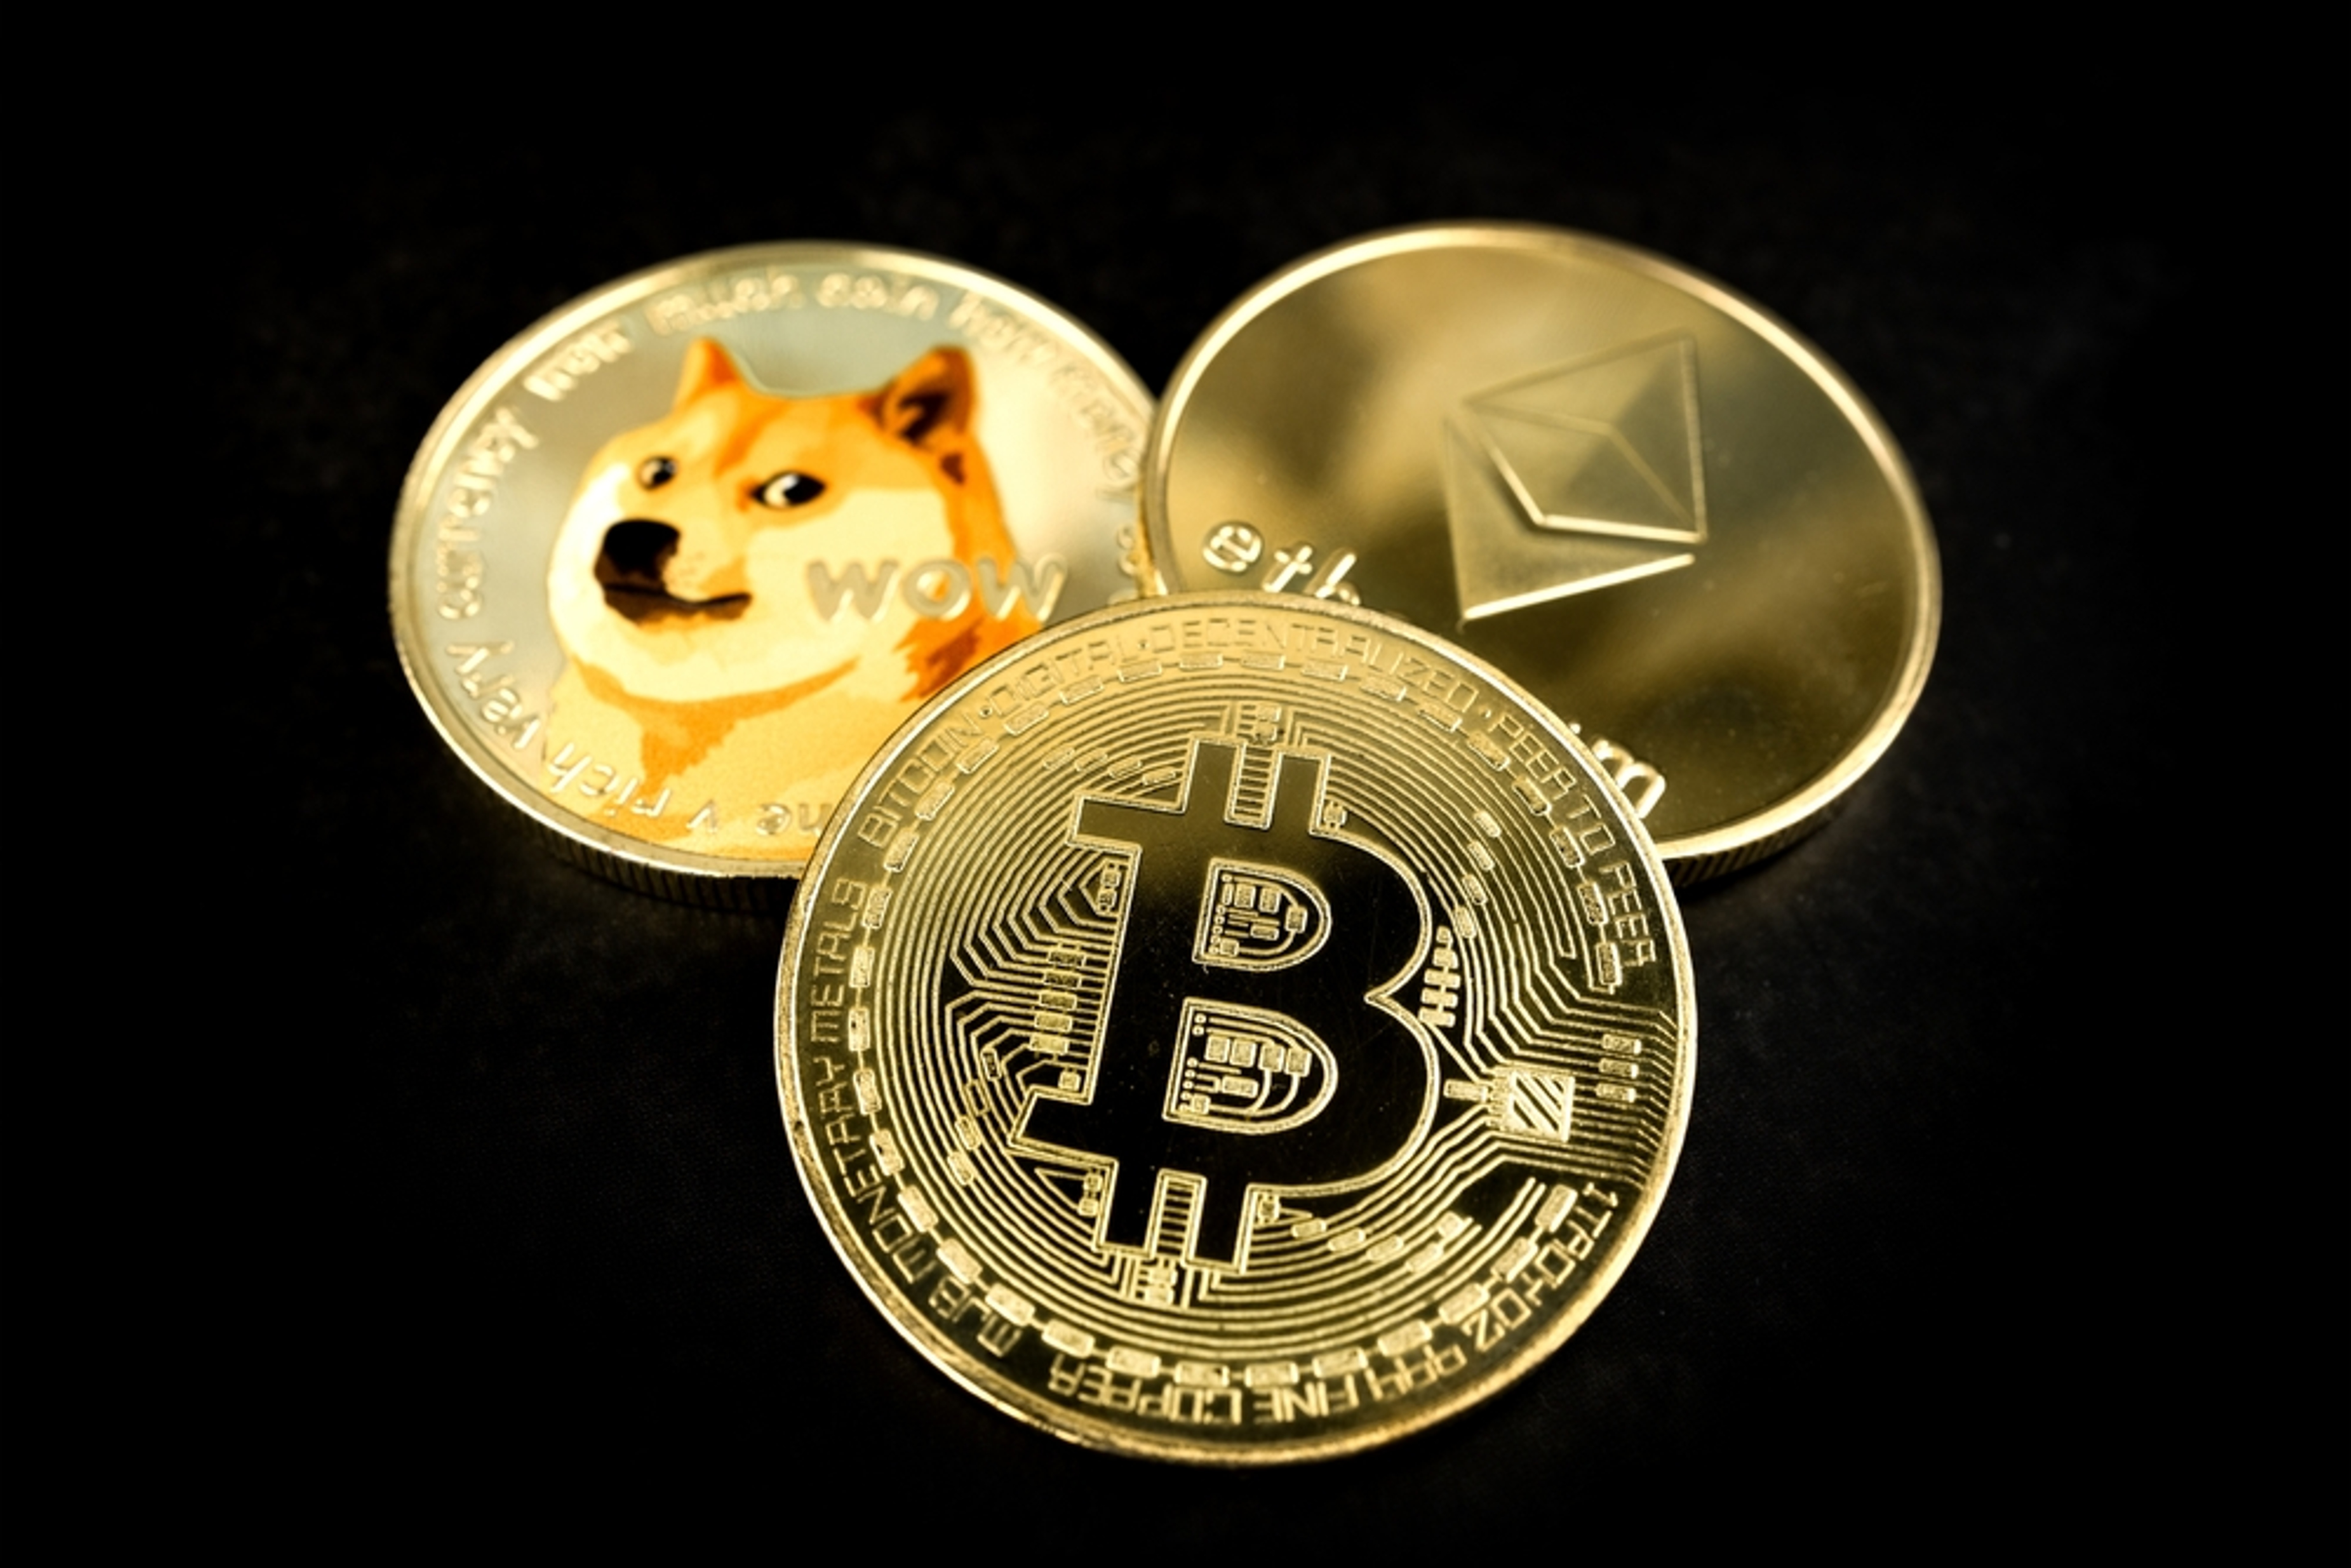 Grayscale&#39;s Ethereum ETF, Elon Musk&#39;s Dog-Inspired Coin, Anthony Scaramucci On Bitcoin And More: Top News From Crypto This Week